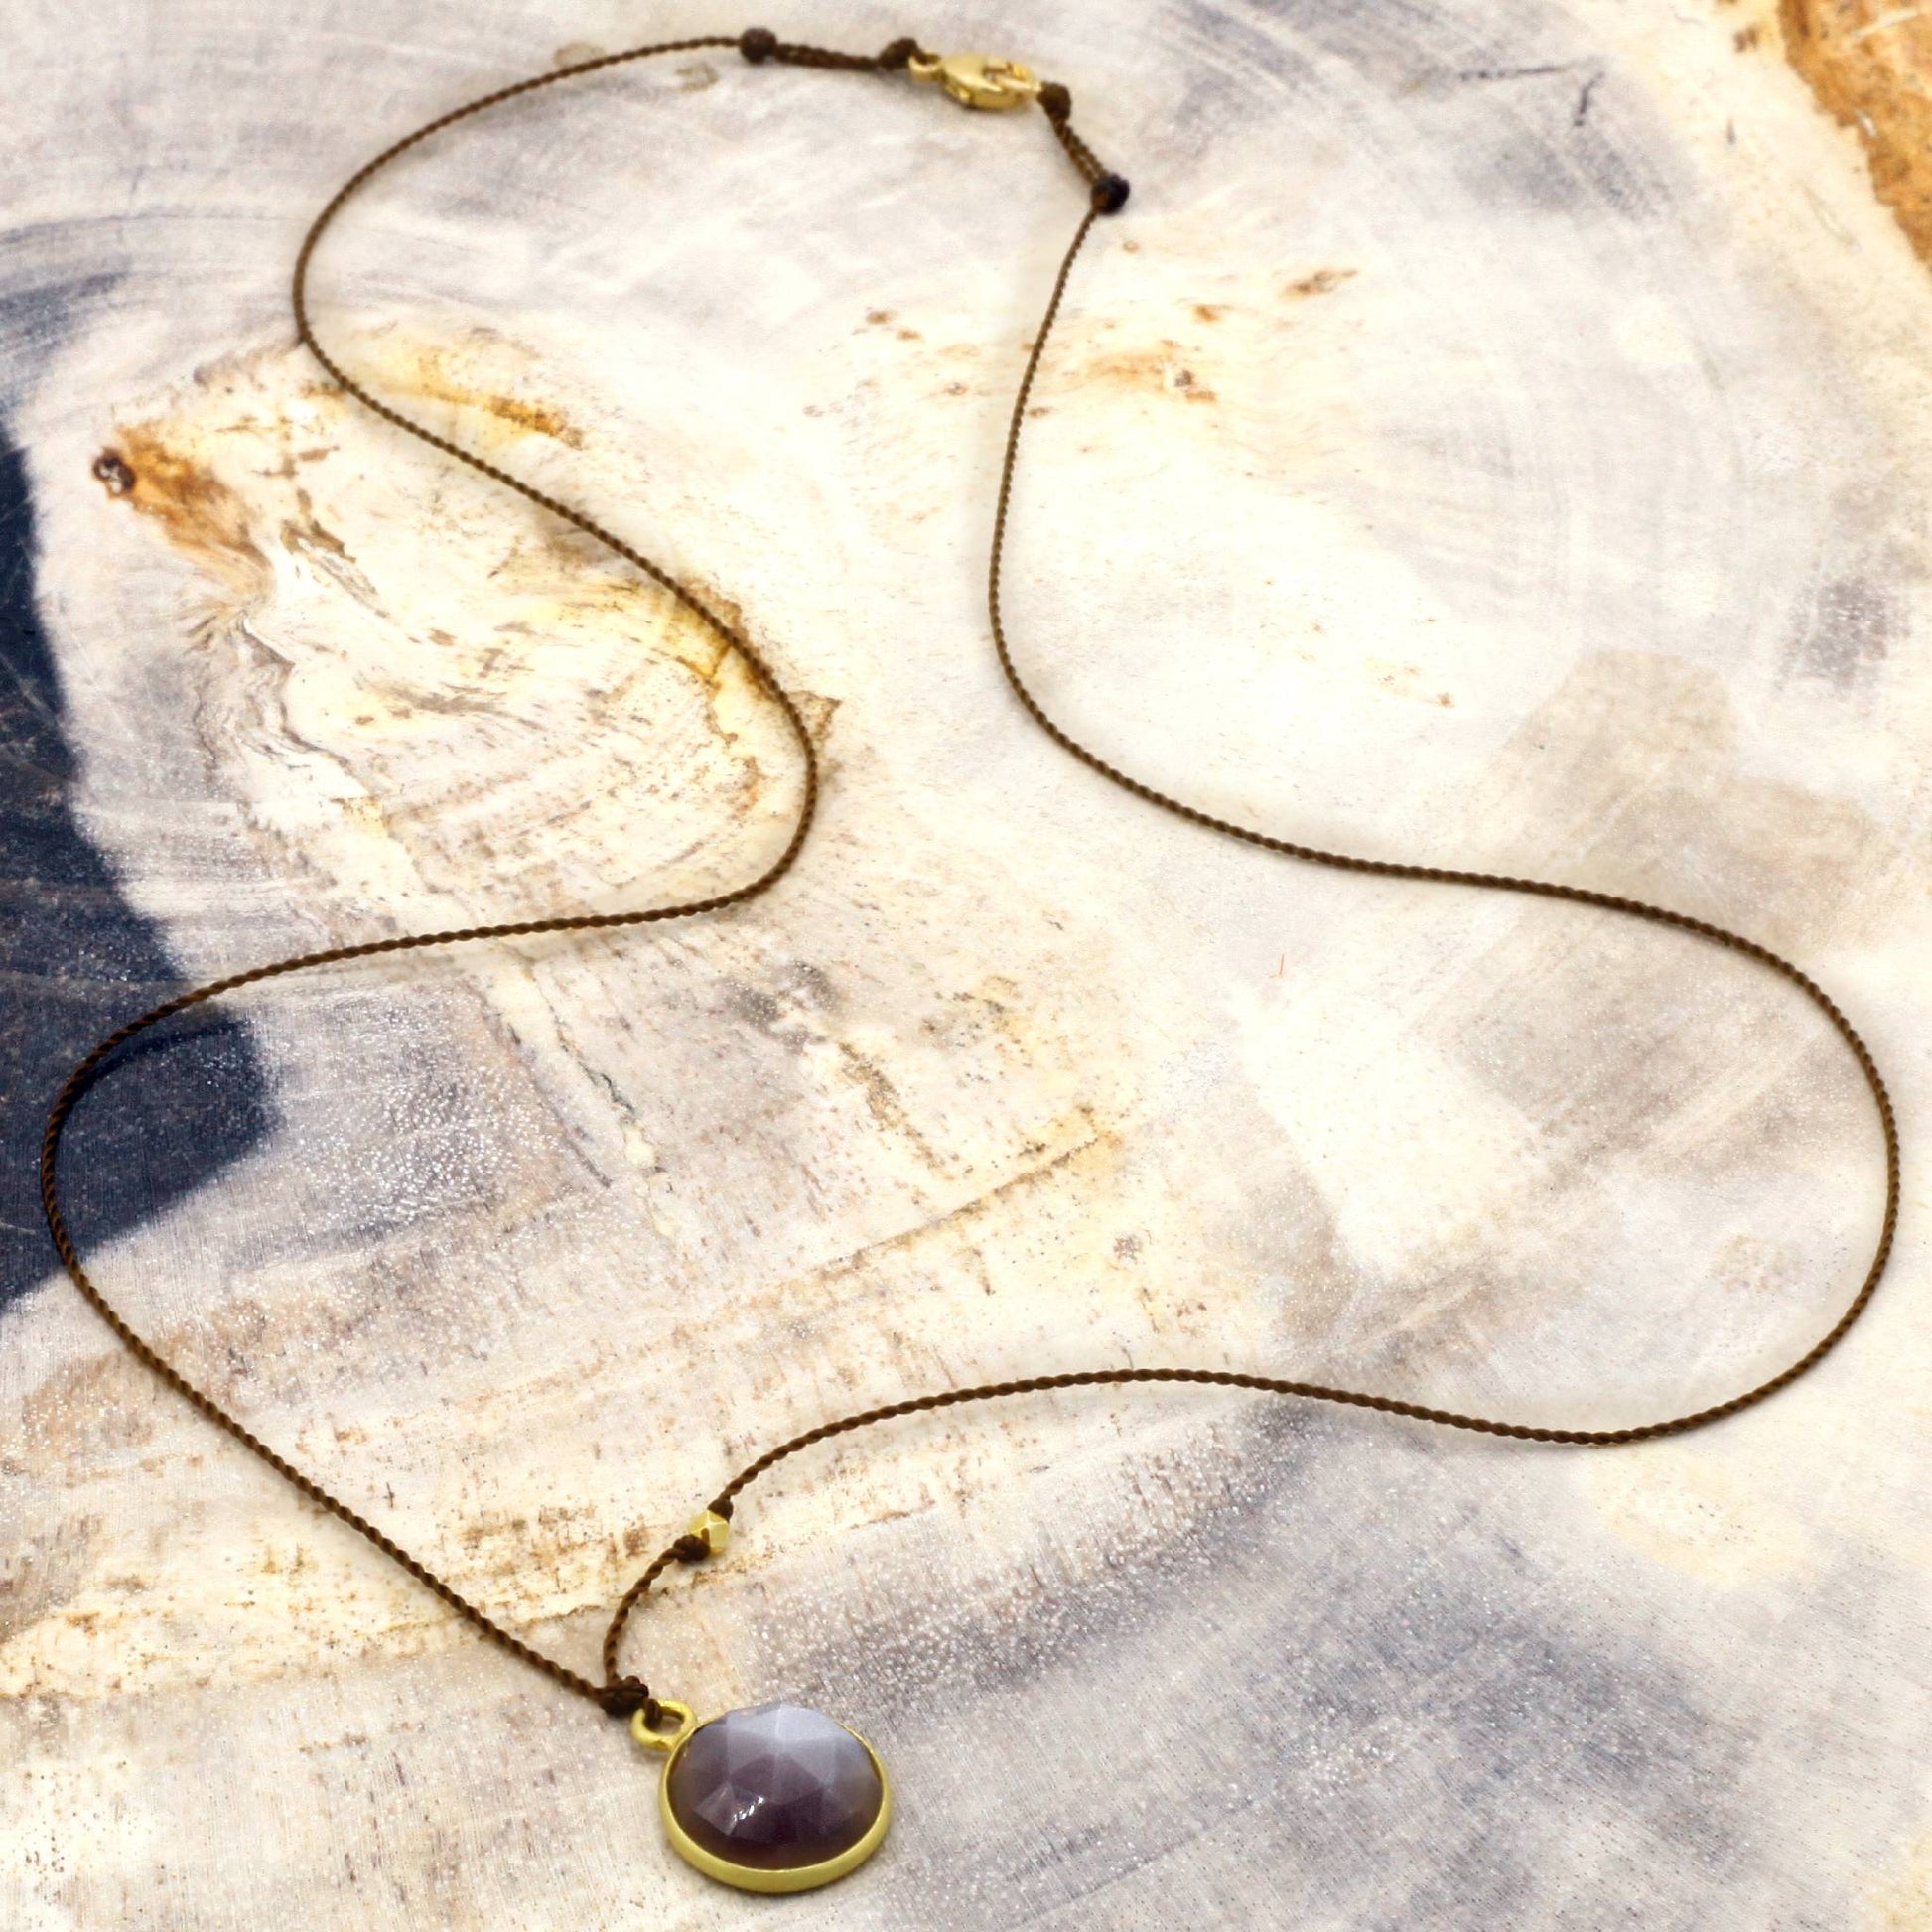 Margeret Solow Jewelry | Chocolate Moonstone + 18k Gold Drop Necklace | Firecracker